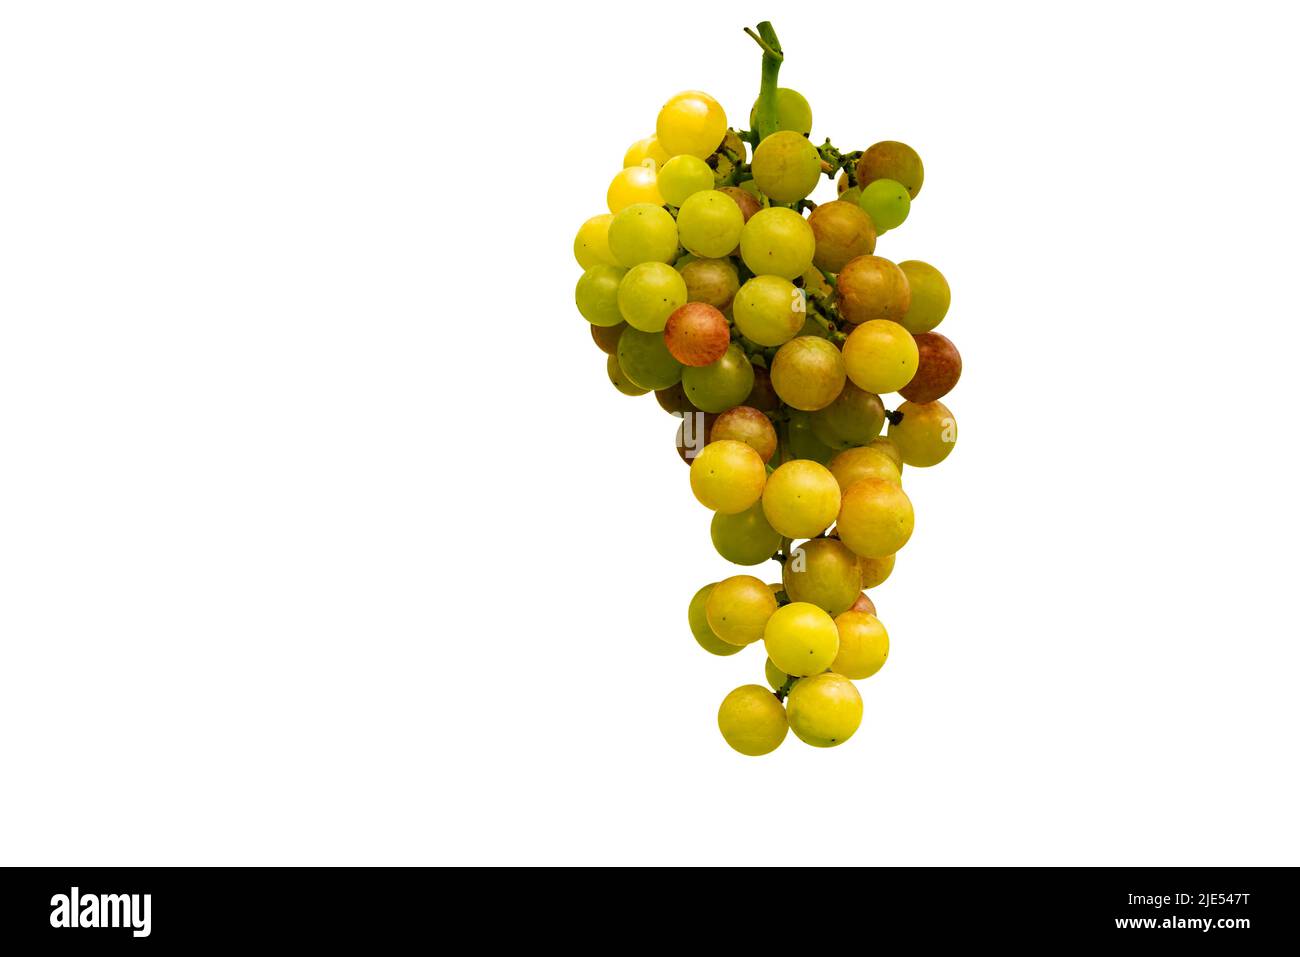 Closeup scene of bunch of growing grapes isolated on white background with clipping path. Stock Photo